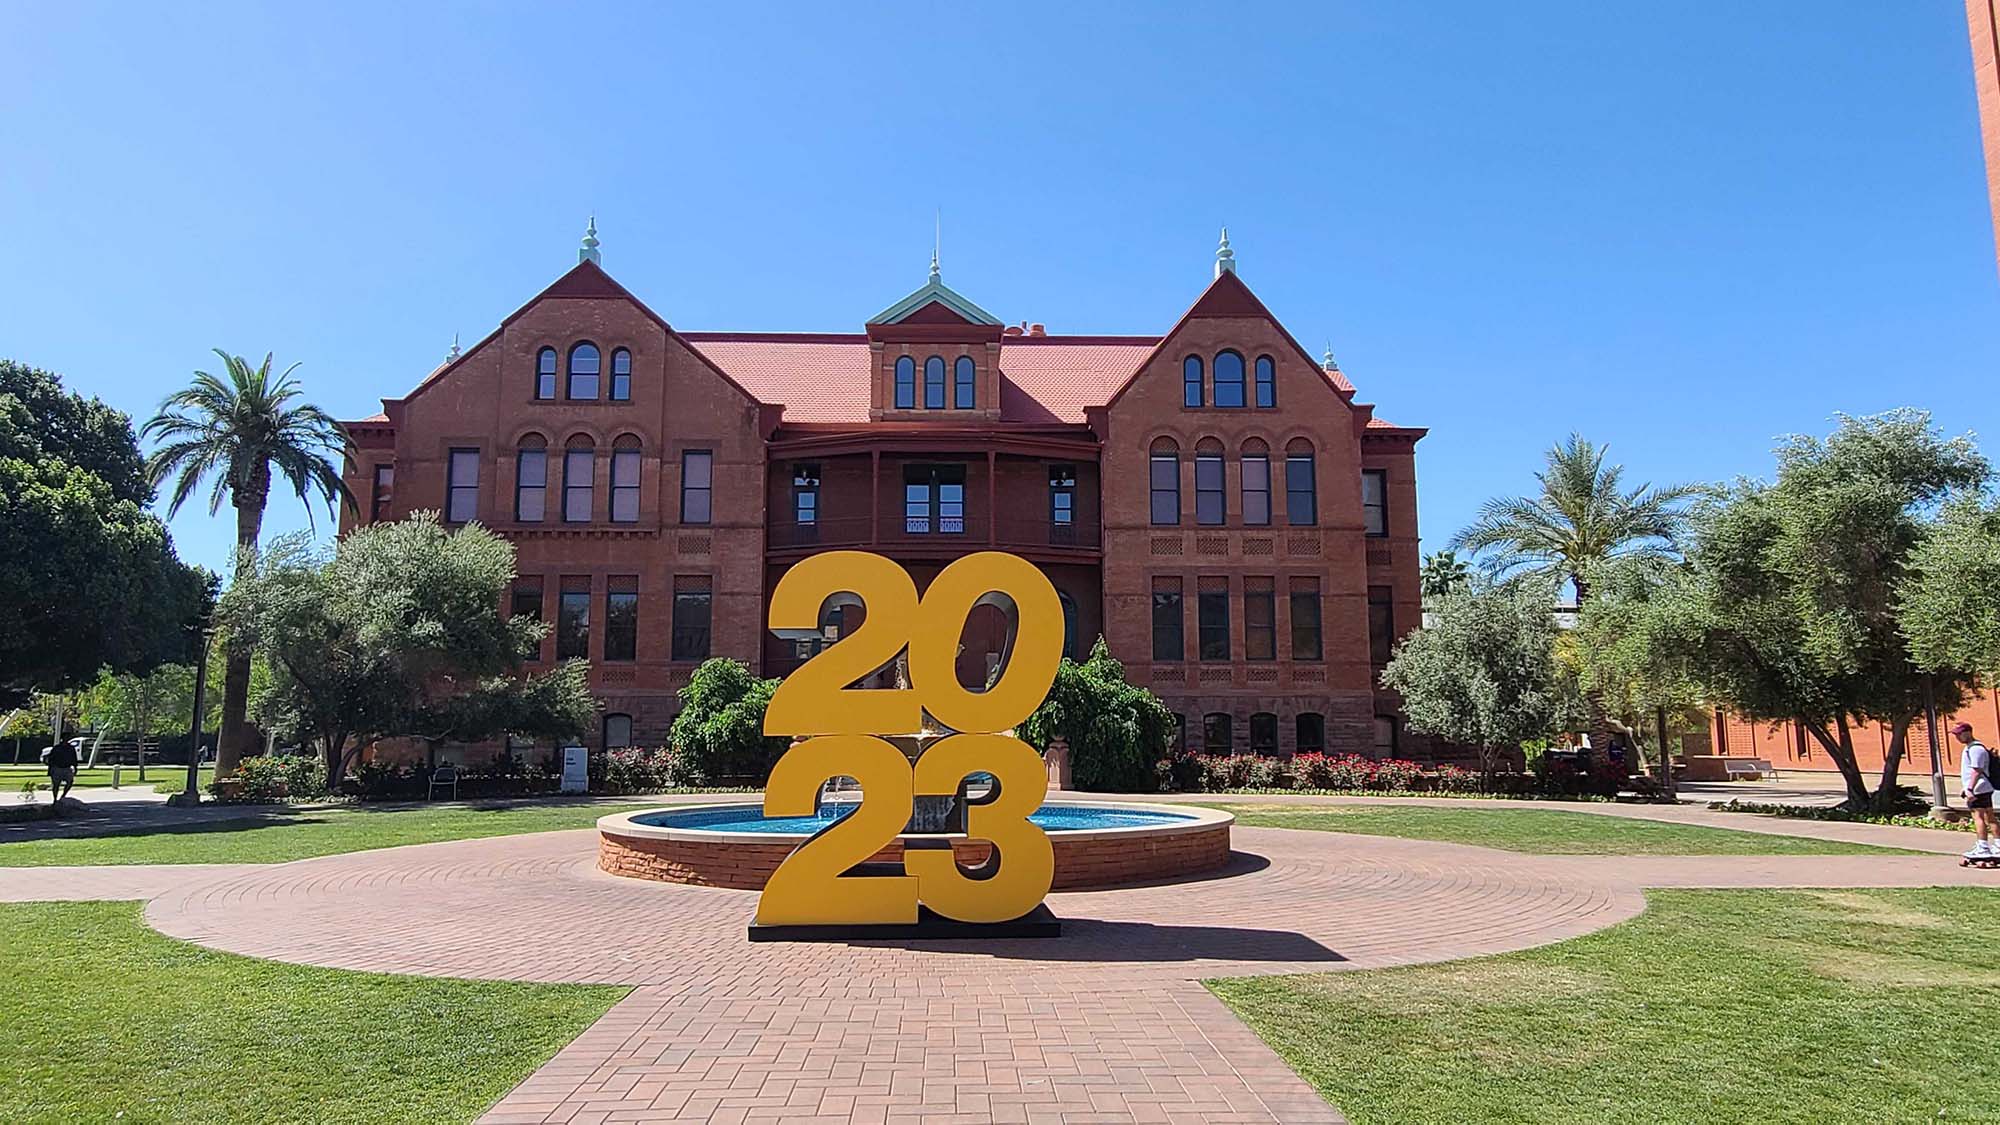 ASU's Old Main building with the gigantic "2023" statue in front of it.